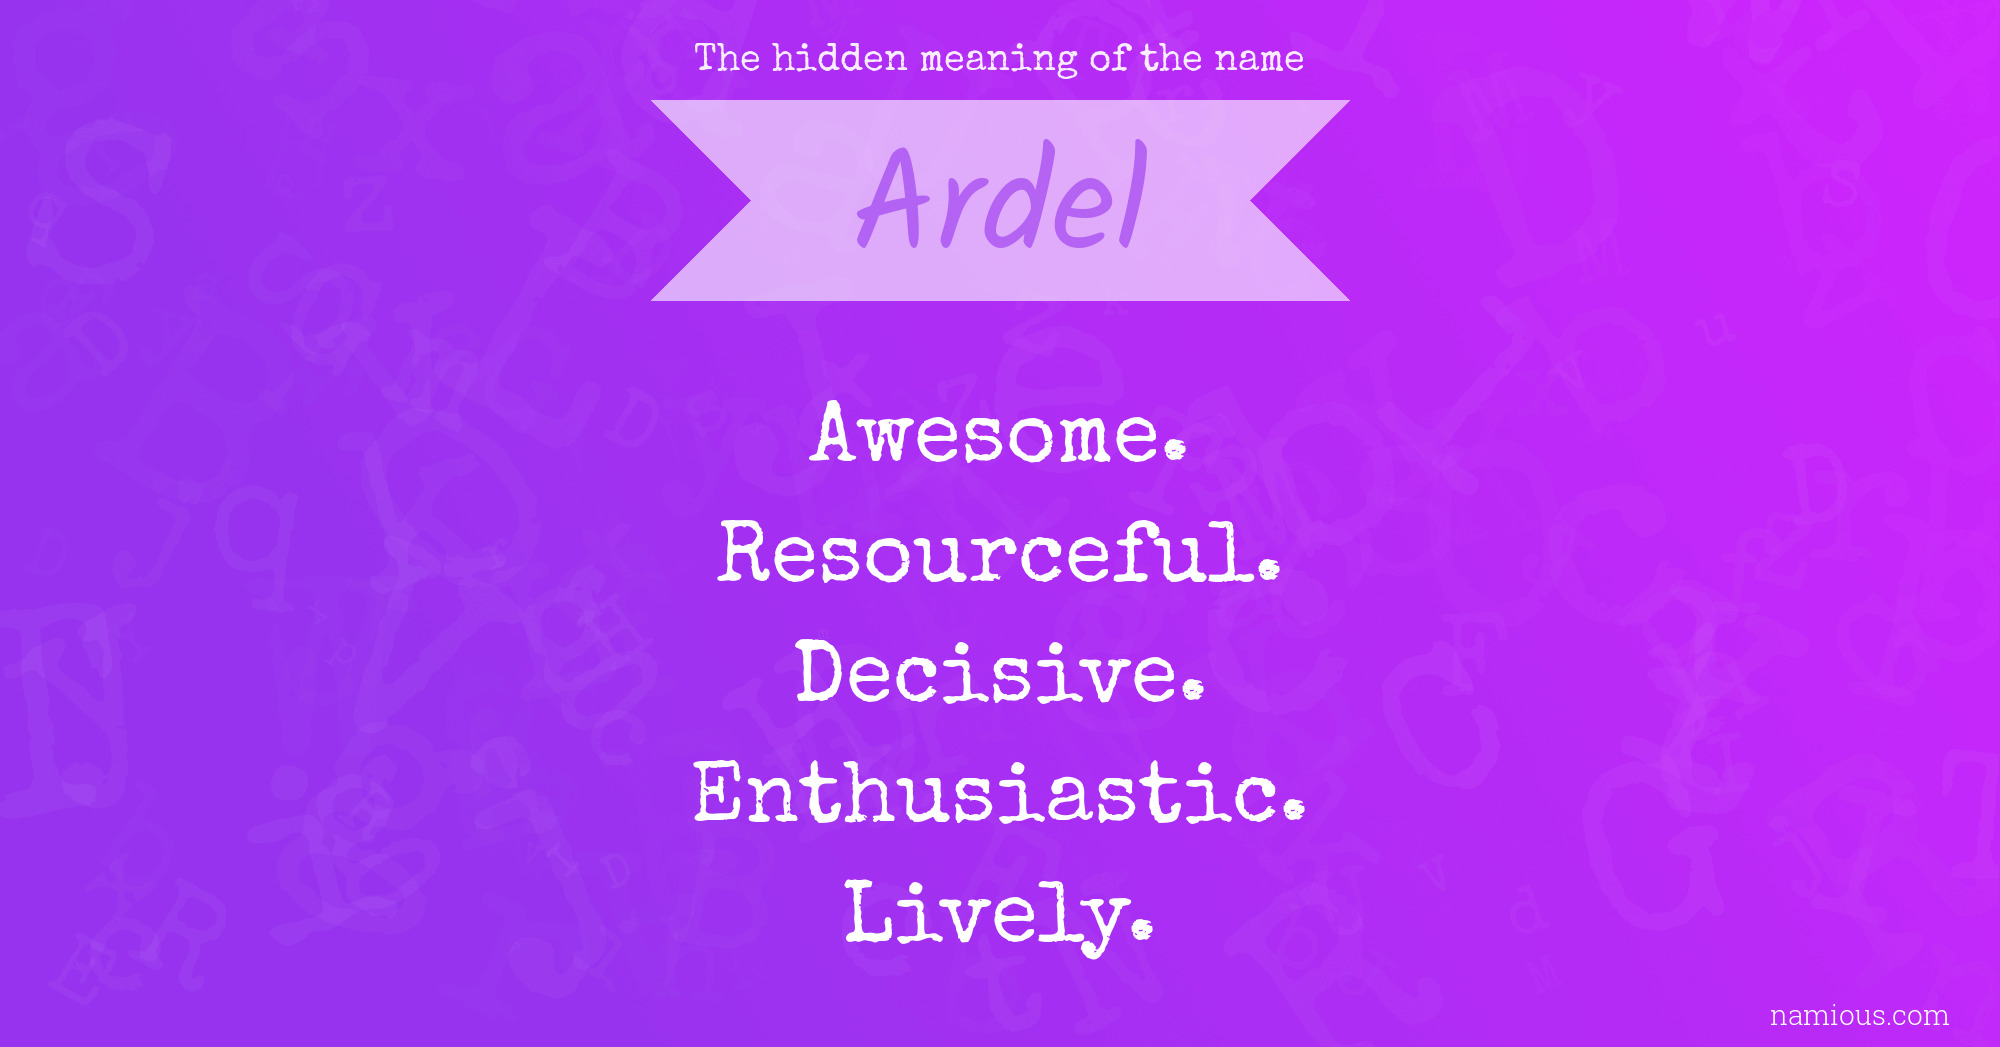 The hidden meaning of the name Ardel